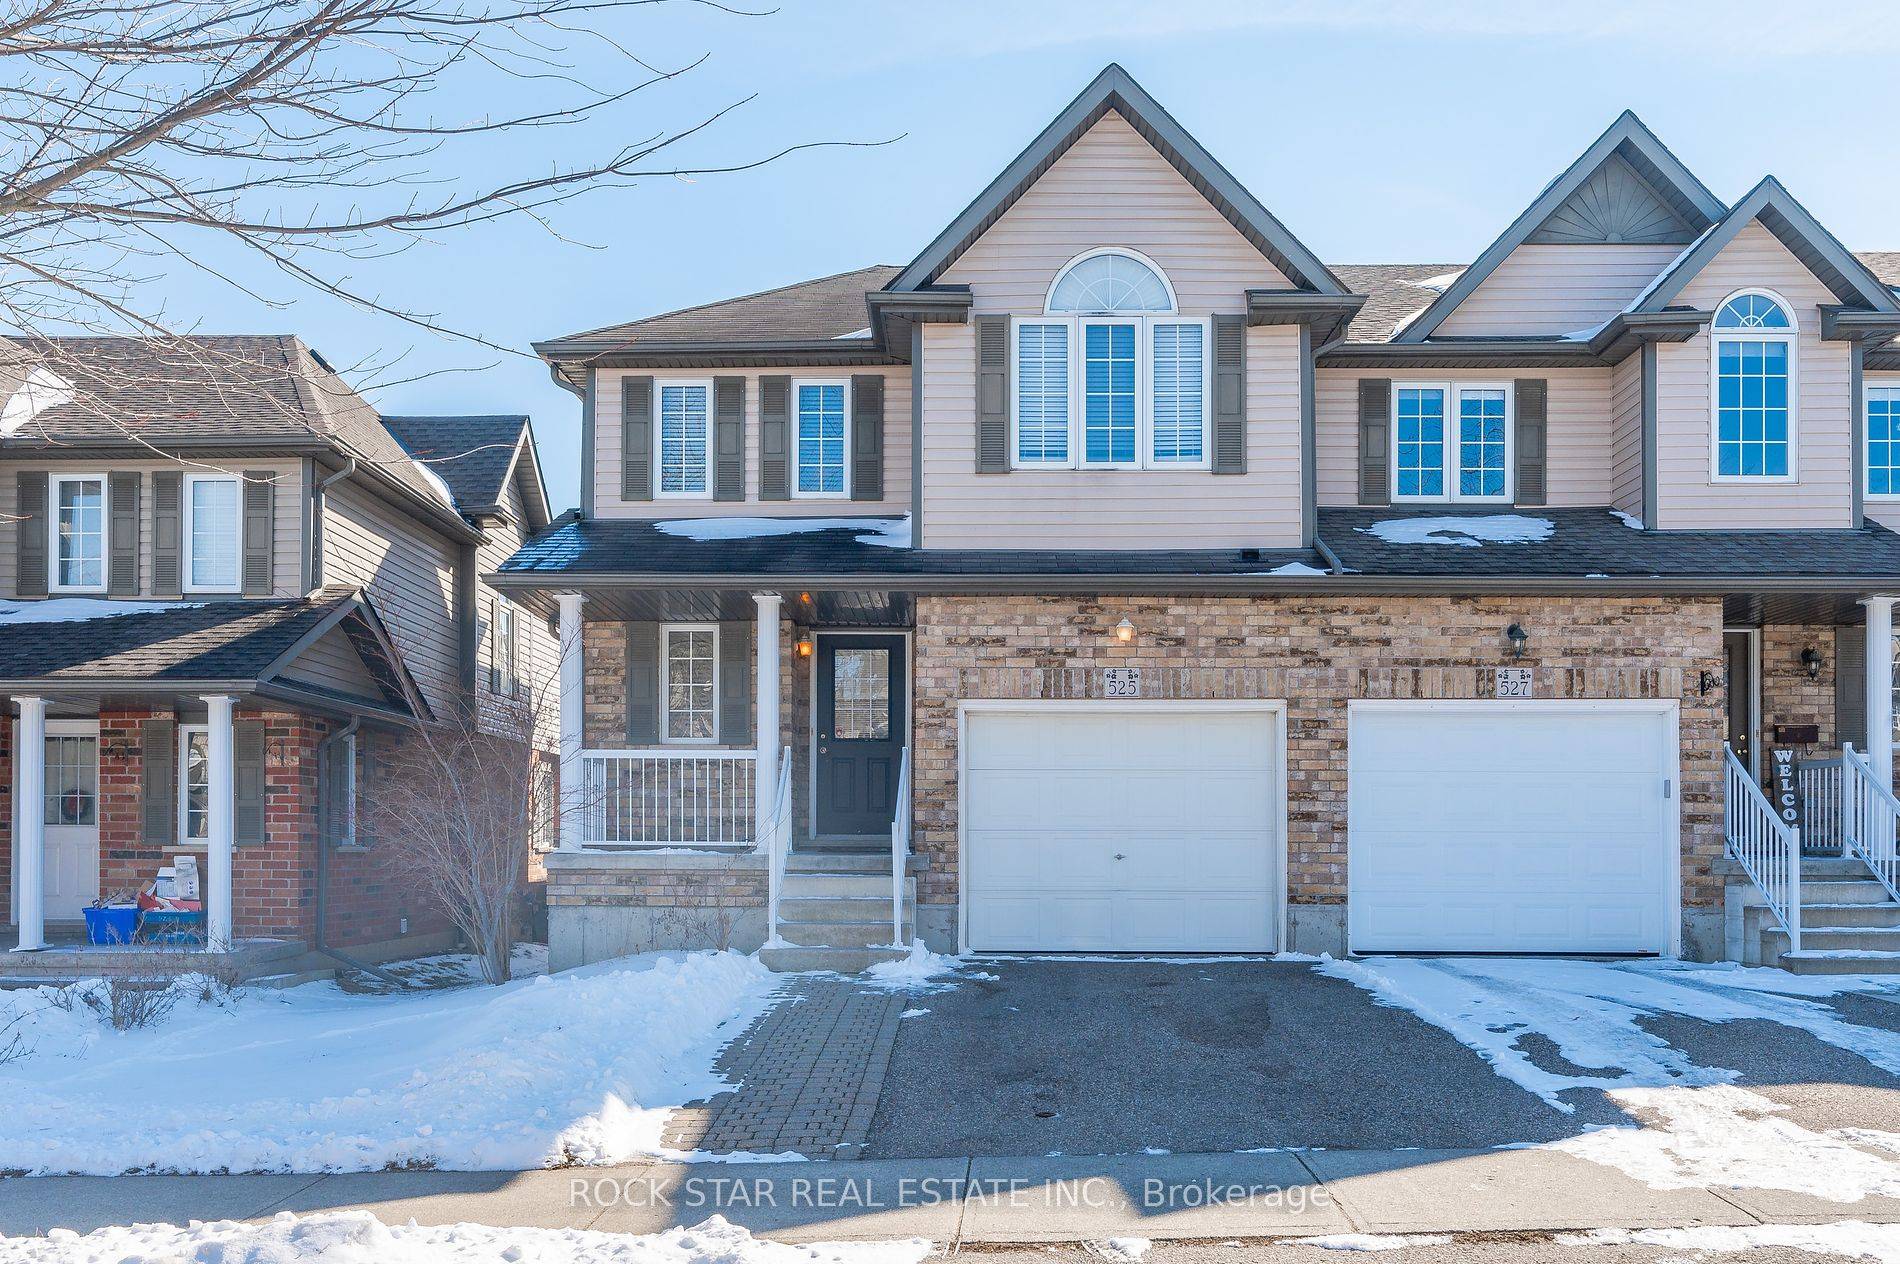 Move in ready, freshly painted end unit townhouse in desirable Columbia Forest Clair Hills.